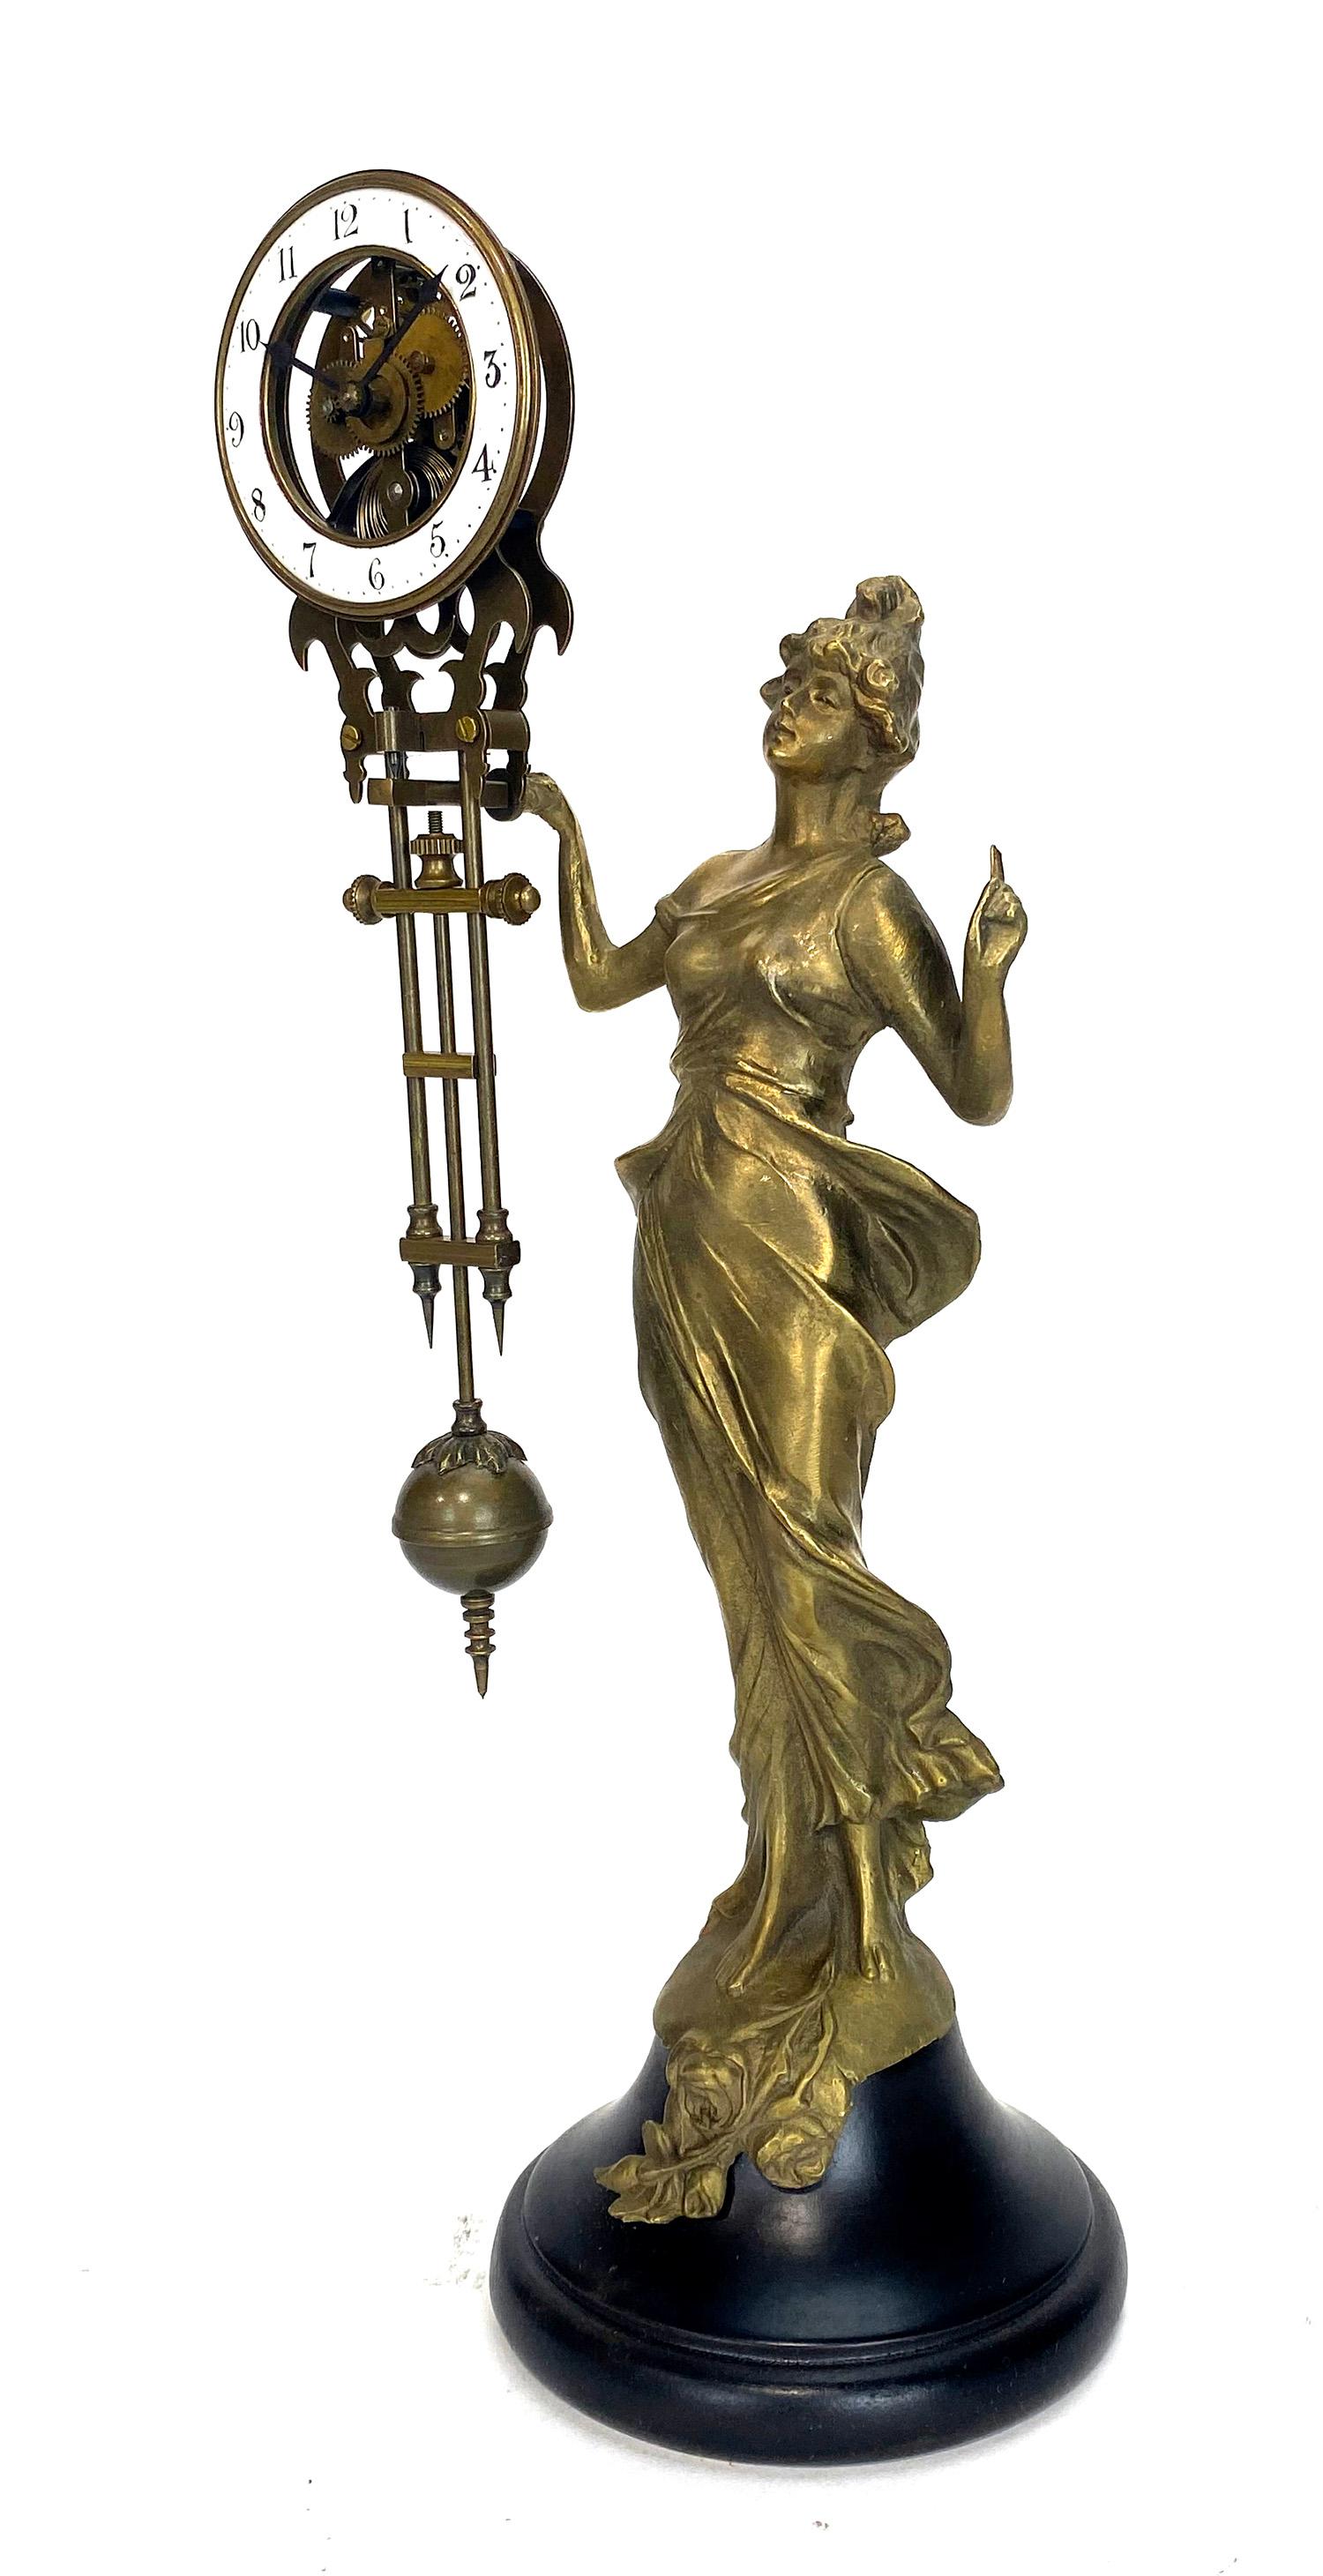 Mystery Diana swinging swinger clock with 8 day skeleton movement.

Solid brass cast lady Diana statue with a wood base. Hand painted 2